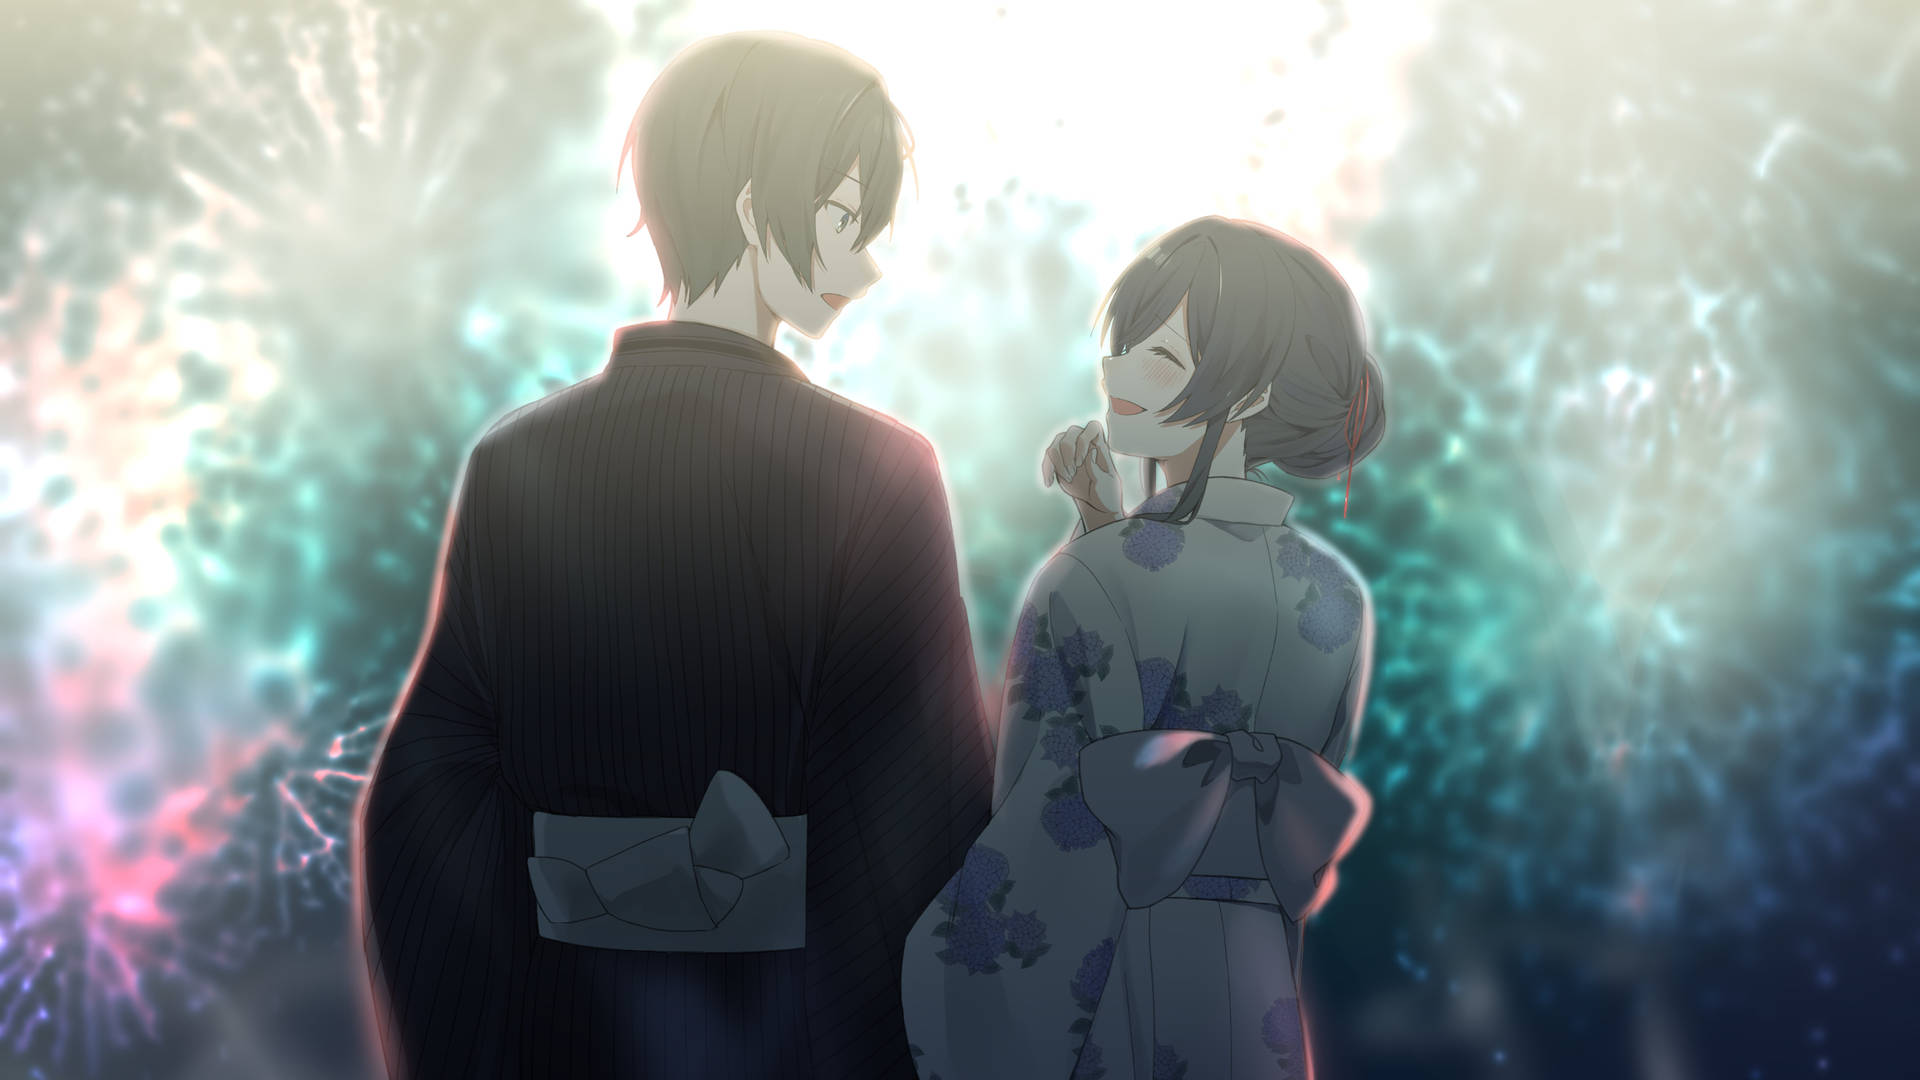 Cute Anime Couple Fireworks Background